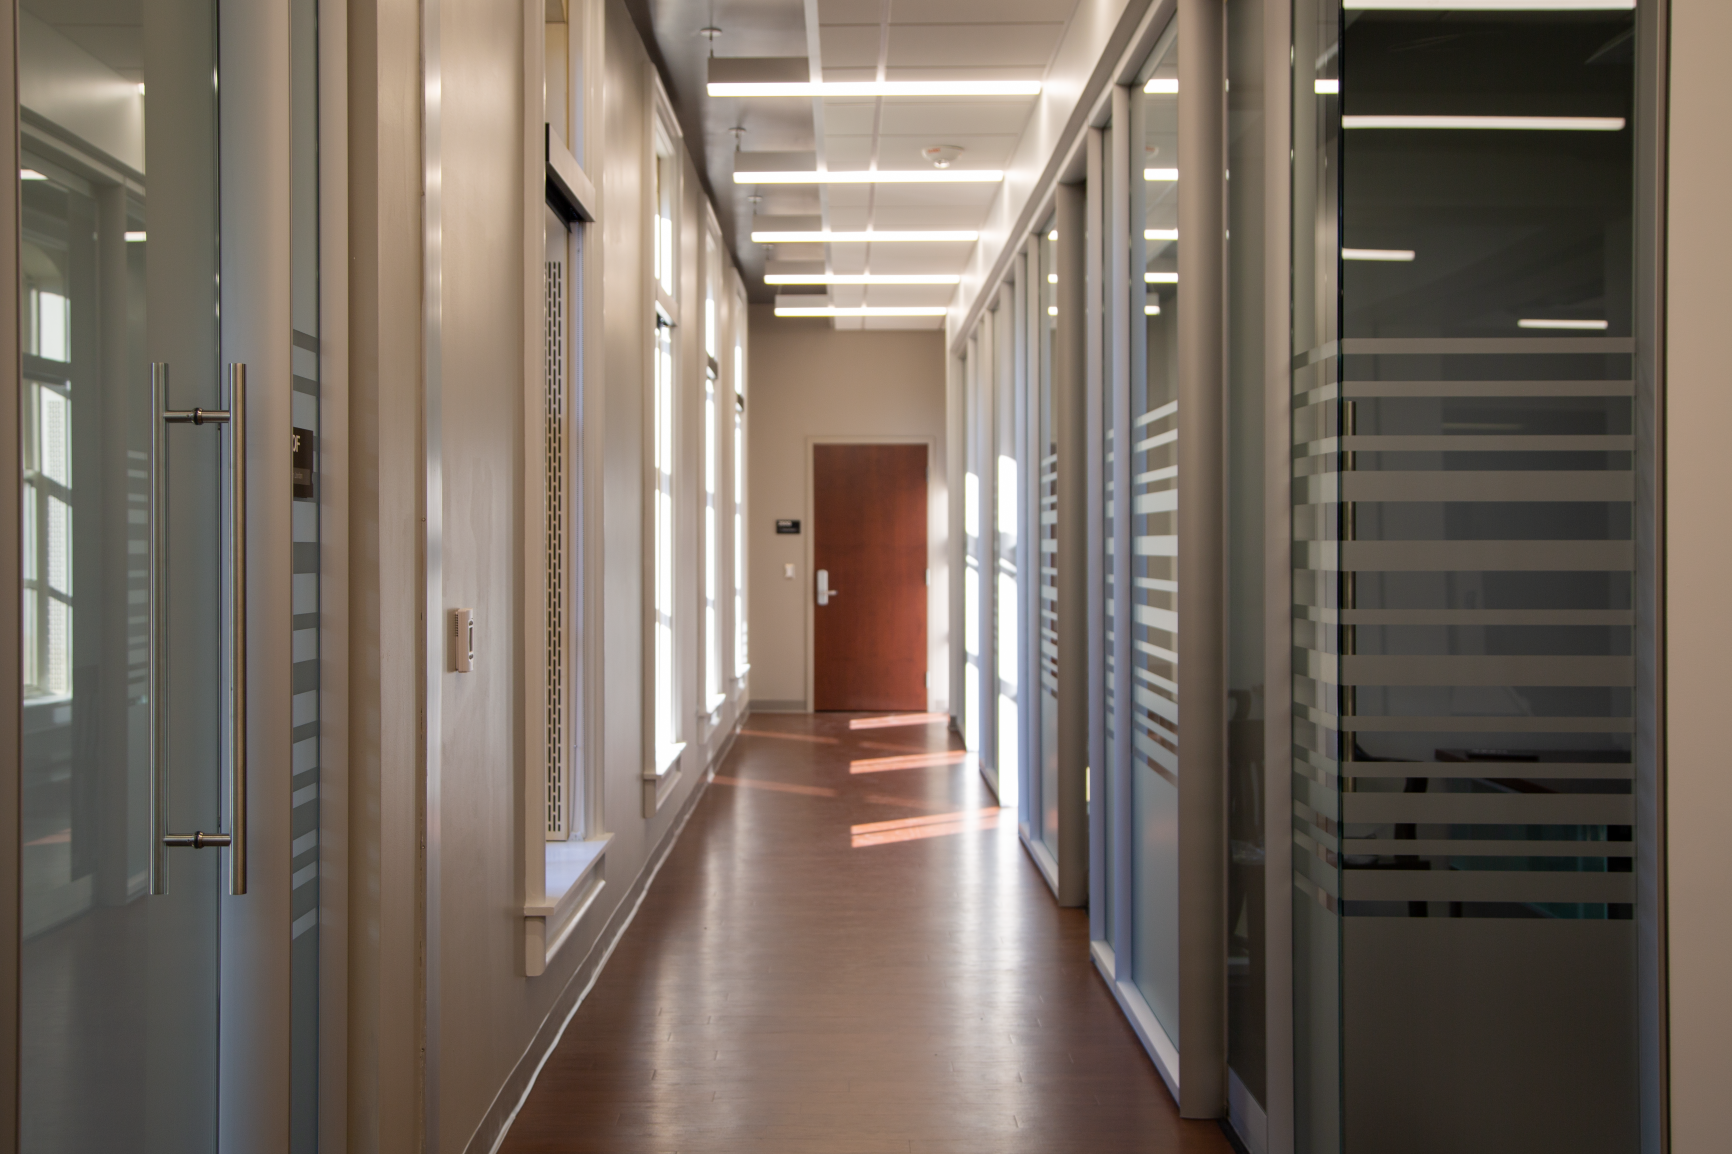 Private offices with DIRTT glass walls bring the sunlight in, leading to the classroom.